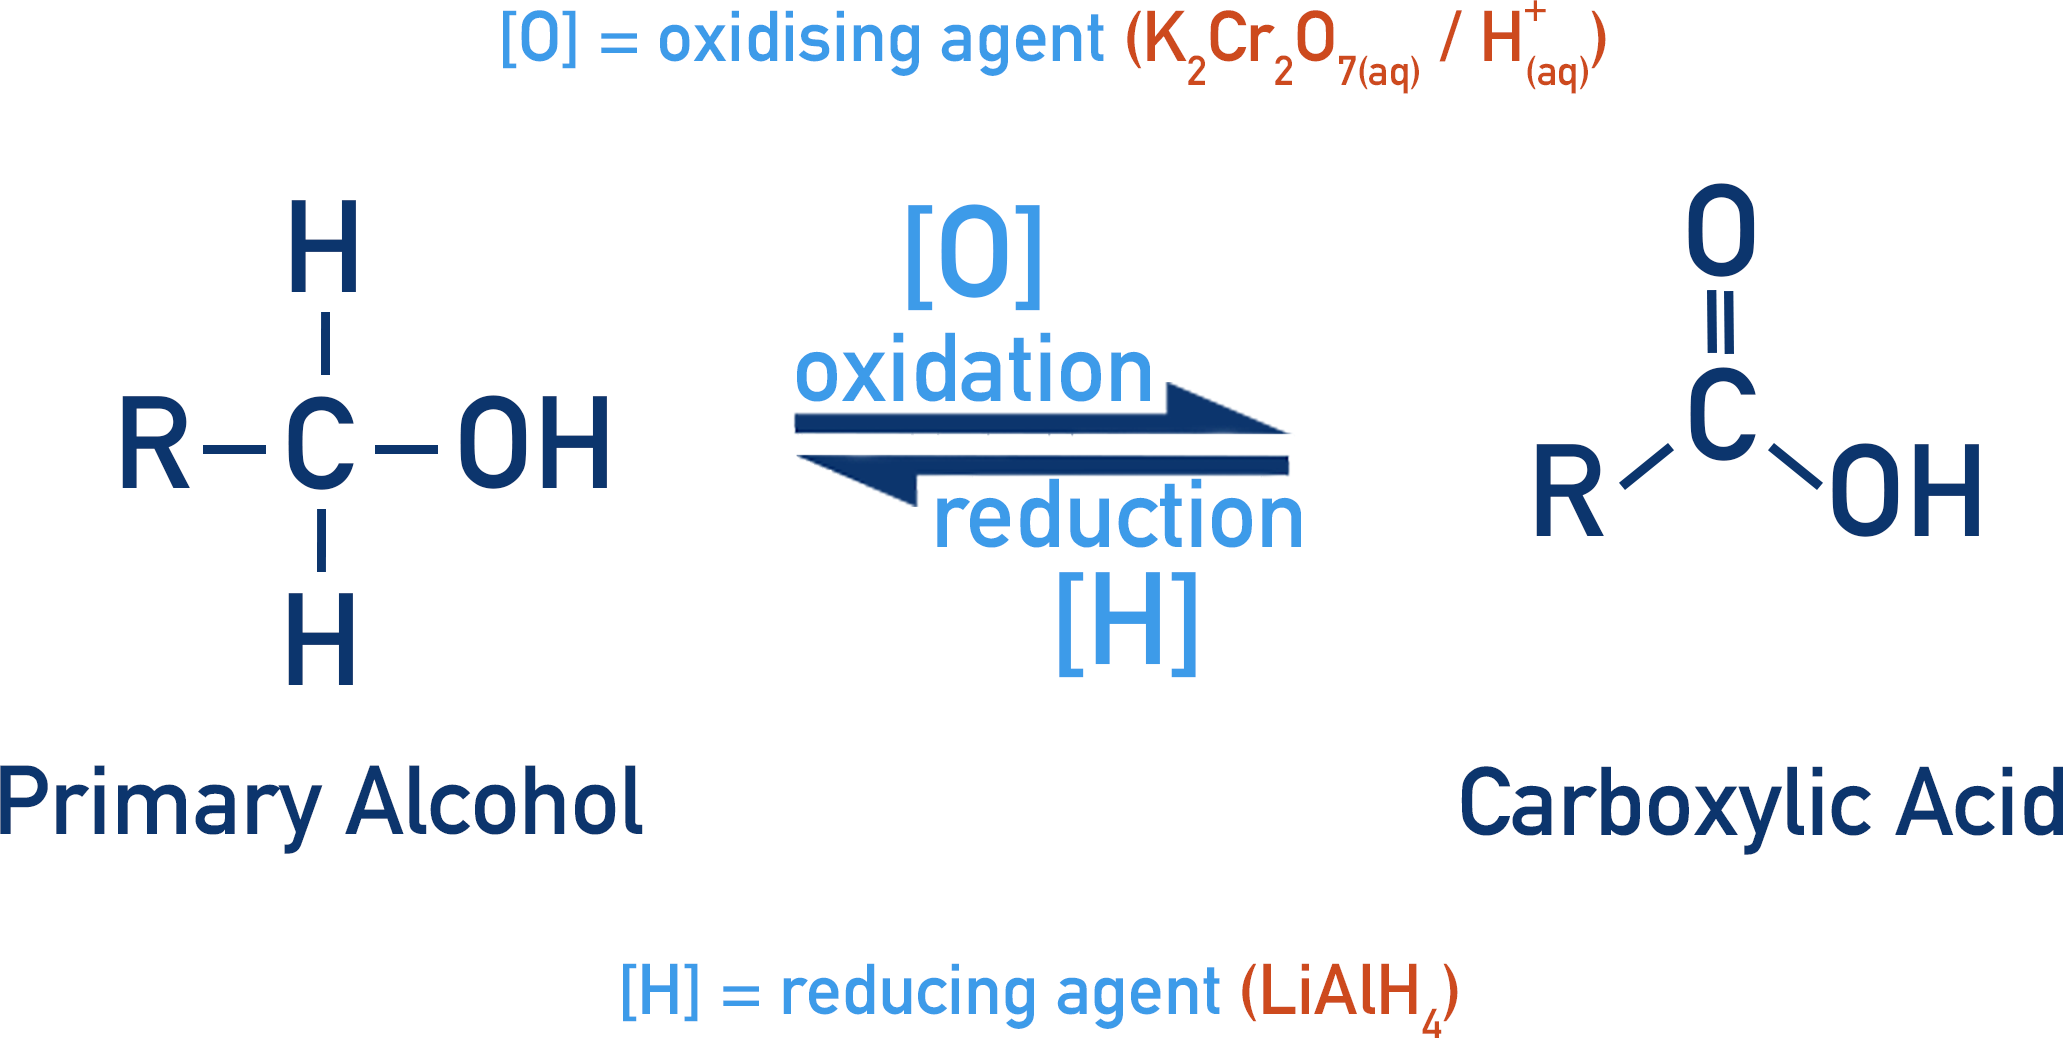 oxidation of primary alcohol and reduction of carboxylic acid